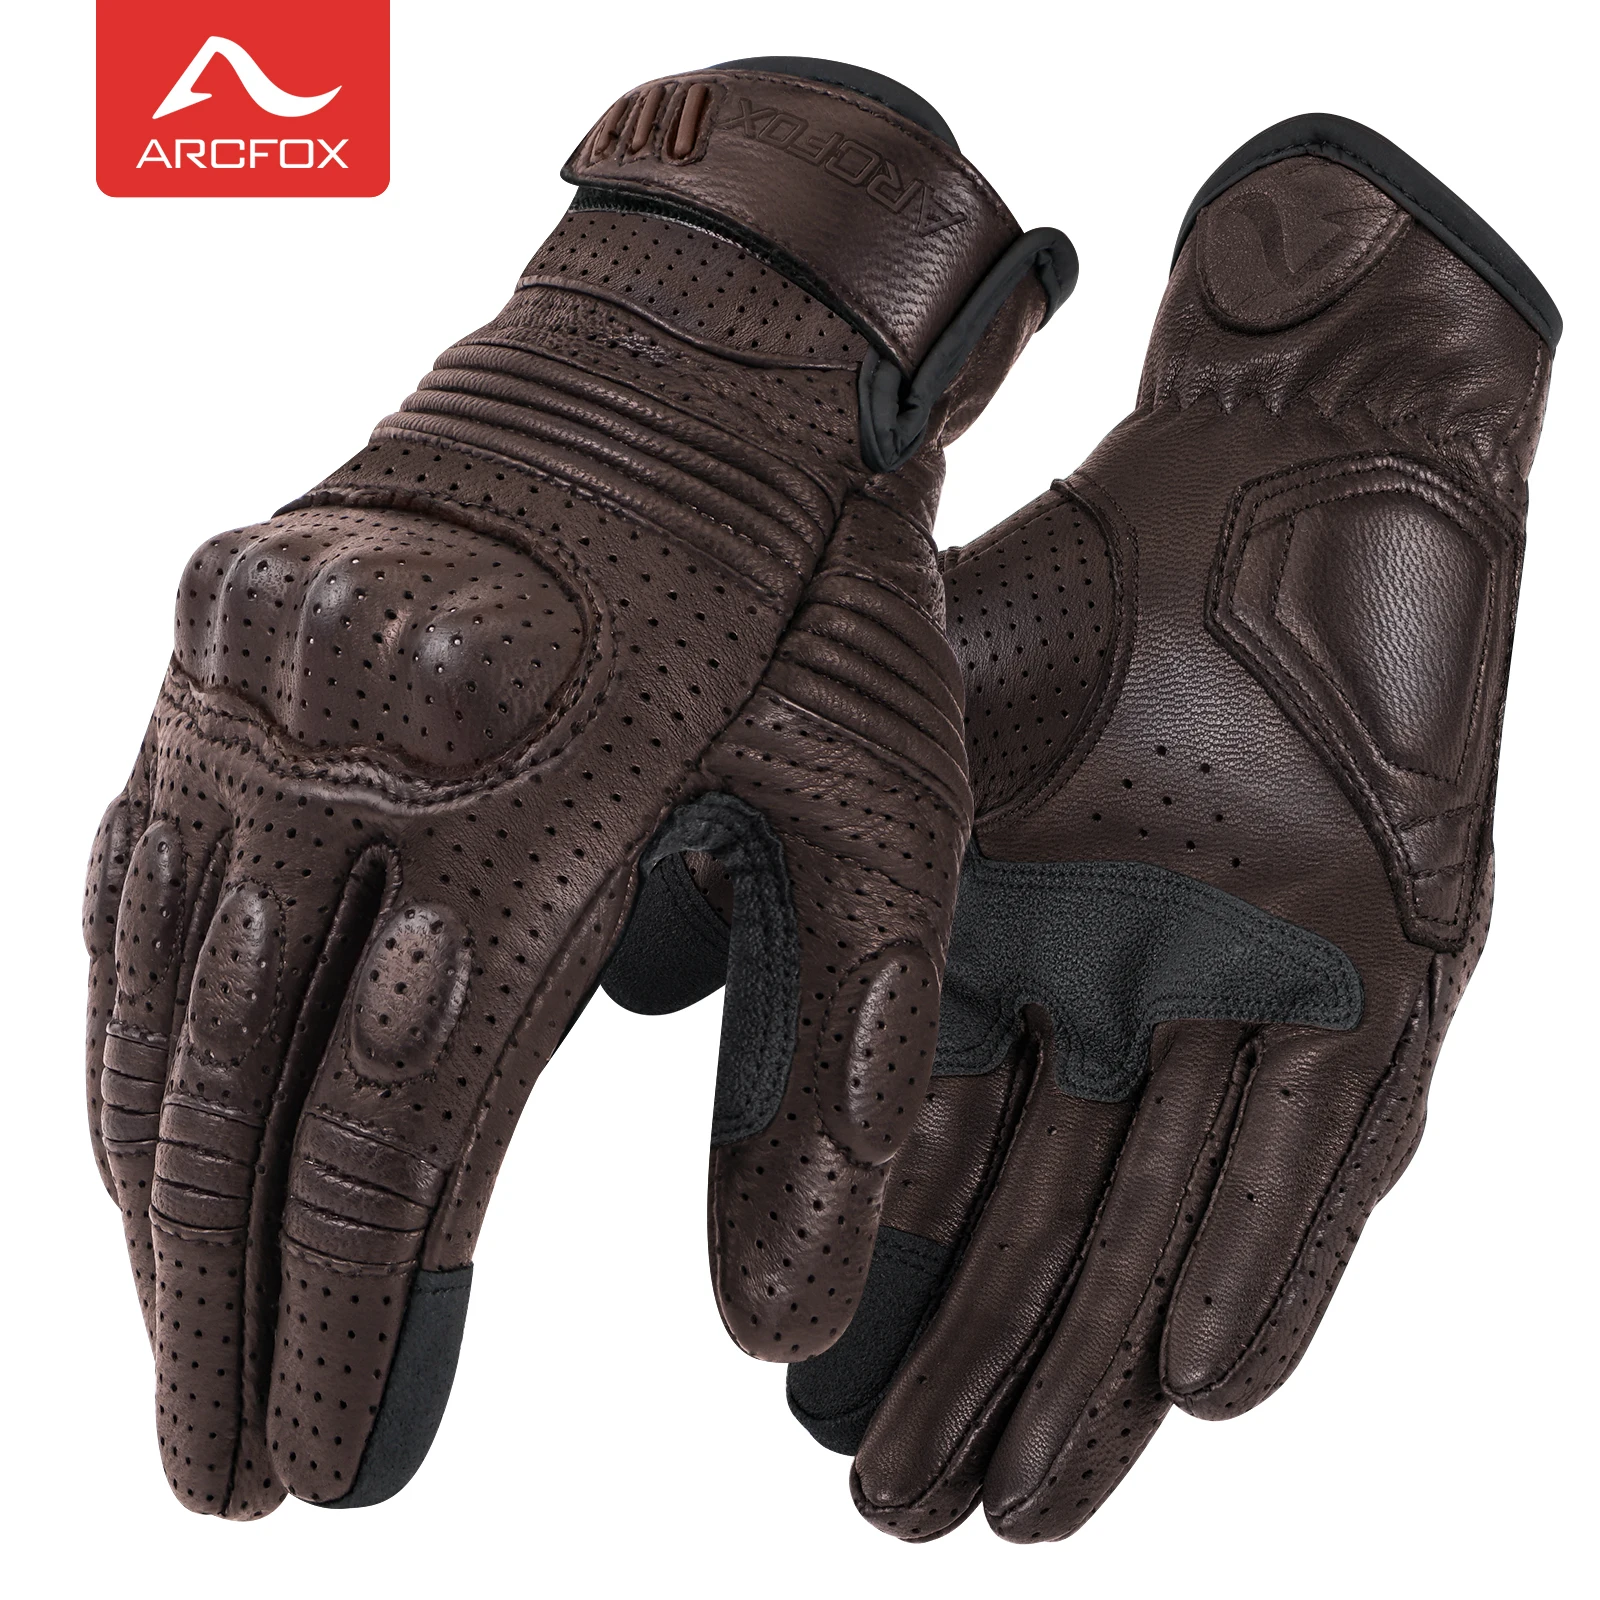 

Vintage Leather Motorcycle Gloves Motorcyclist Racing Protective Gear Perforated Touchscreen Men Motorbike Riding Guantes Luvas